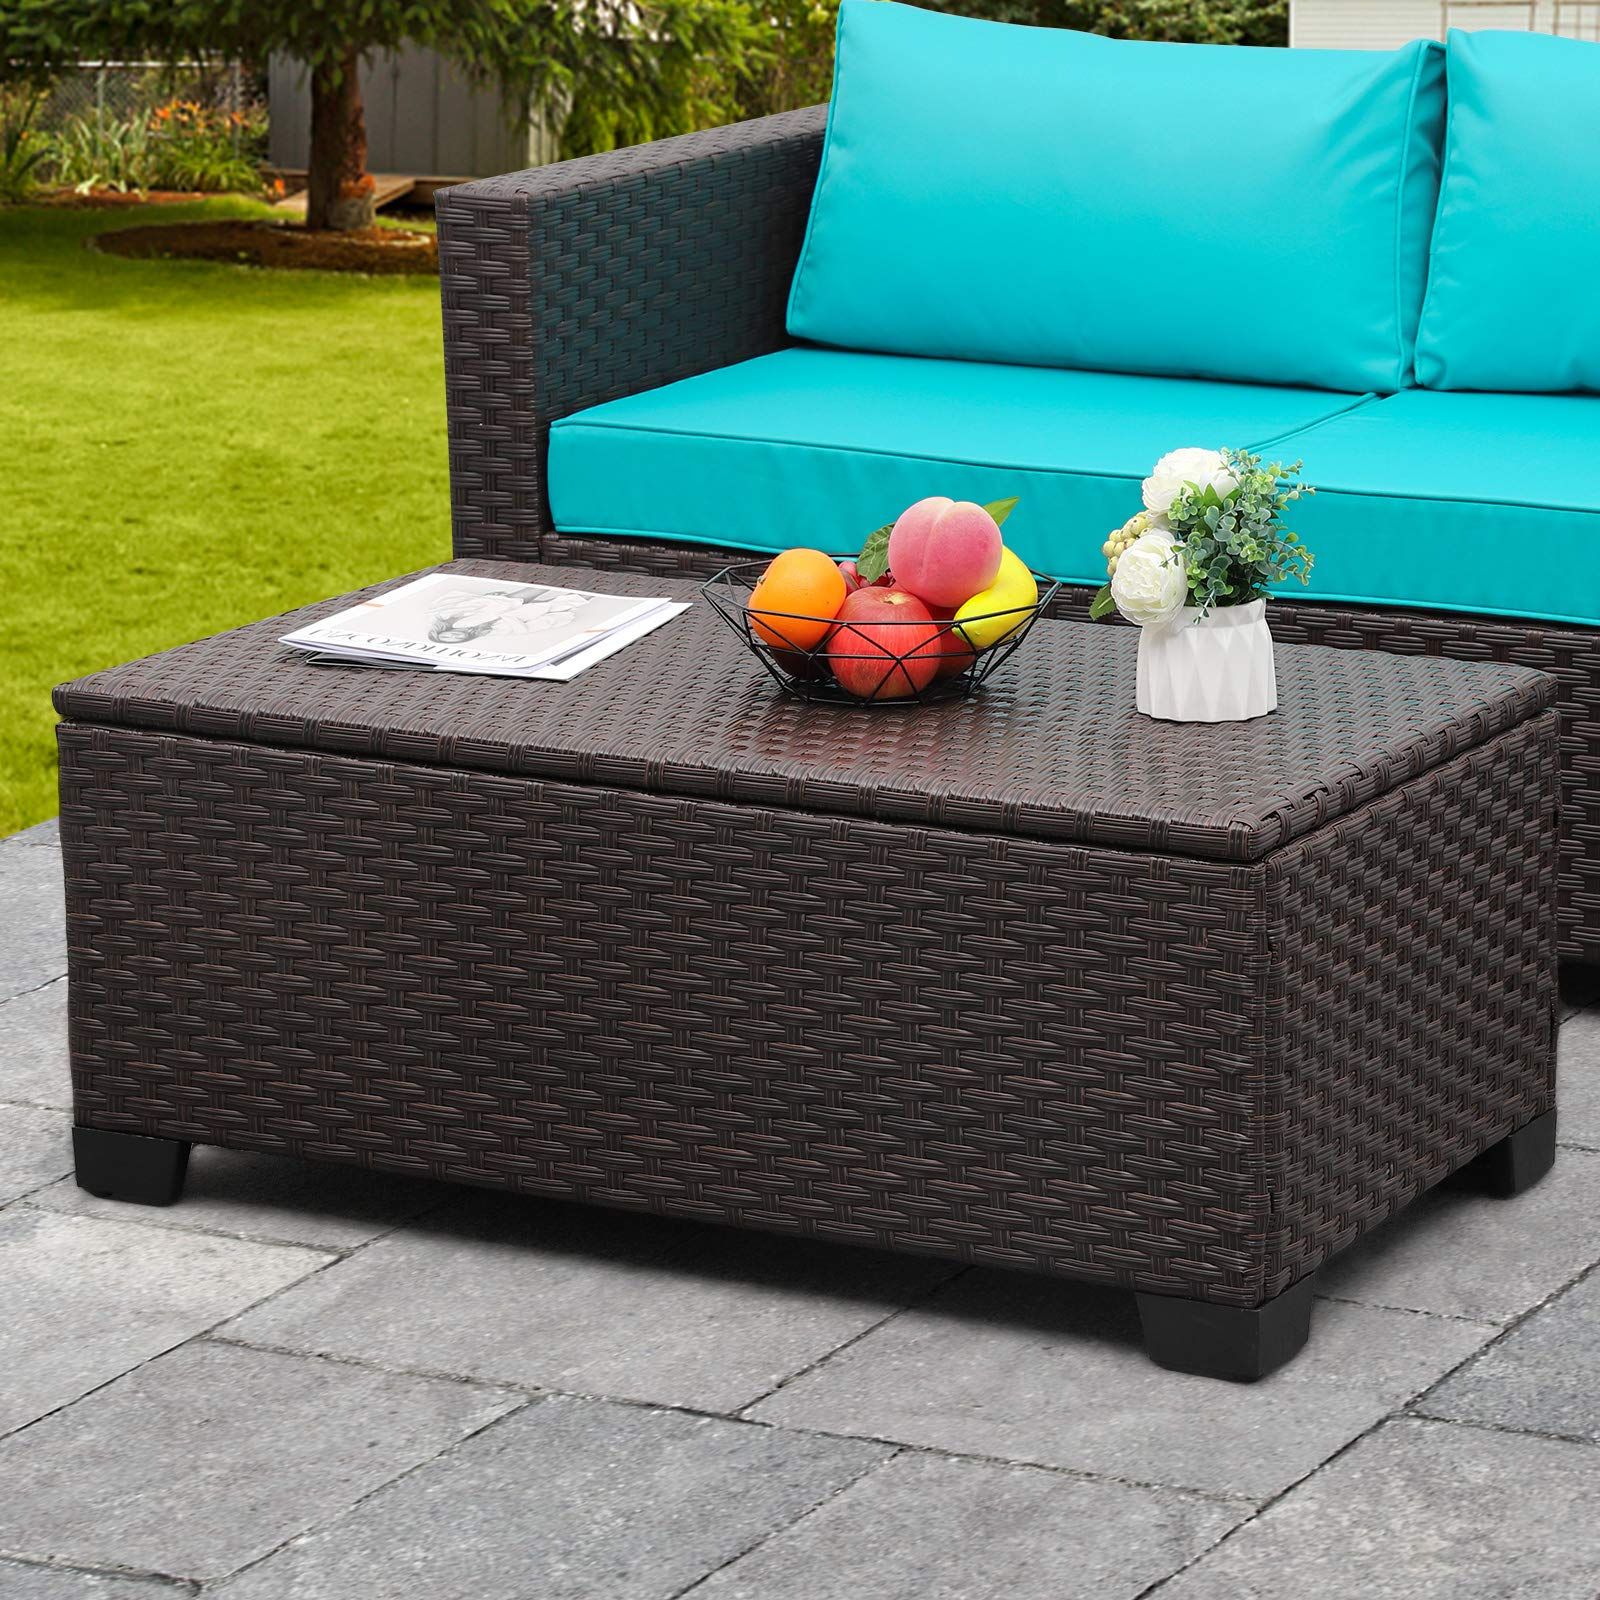 Storage Table For Backyard, Garden, Porch Inside Recent Amazon: Outdoor Storage Table Wicker Patio Coffee Table All Weather  Rattan Side Table With Waterproof Cover, Brown : Patio, Lawn & Garden (View 2 of 15)